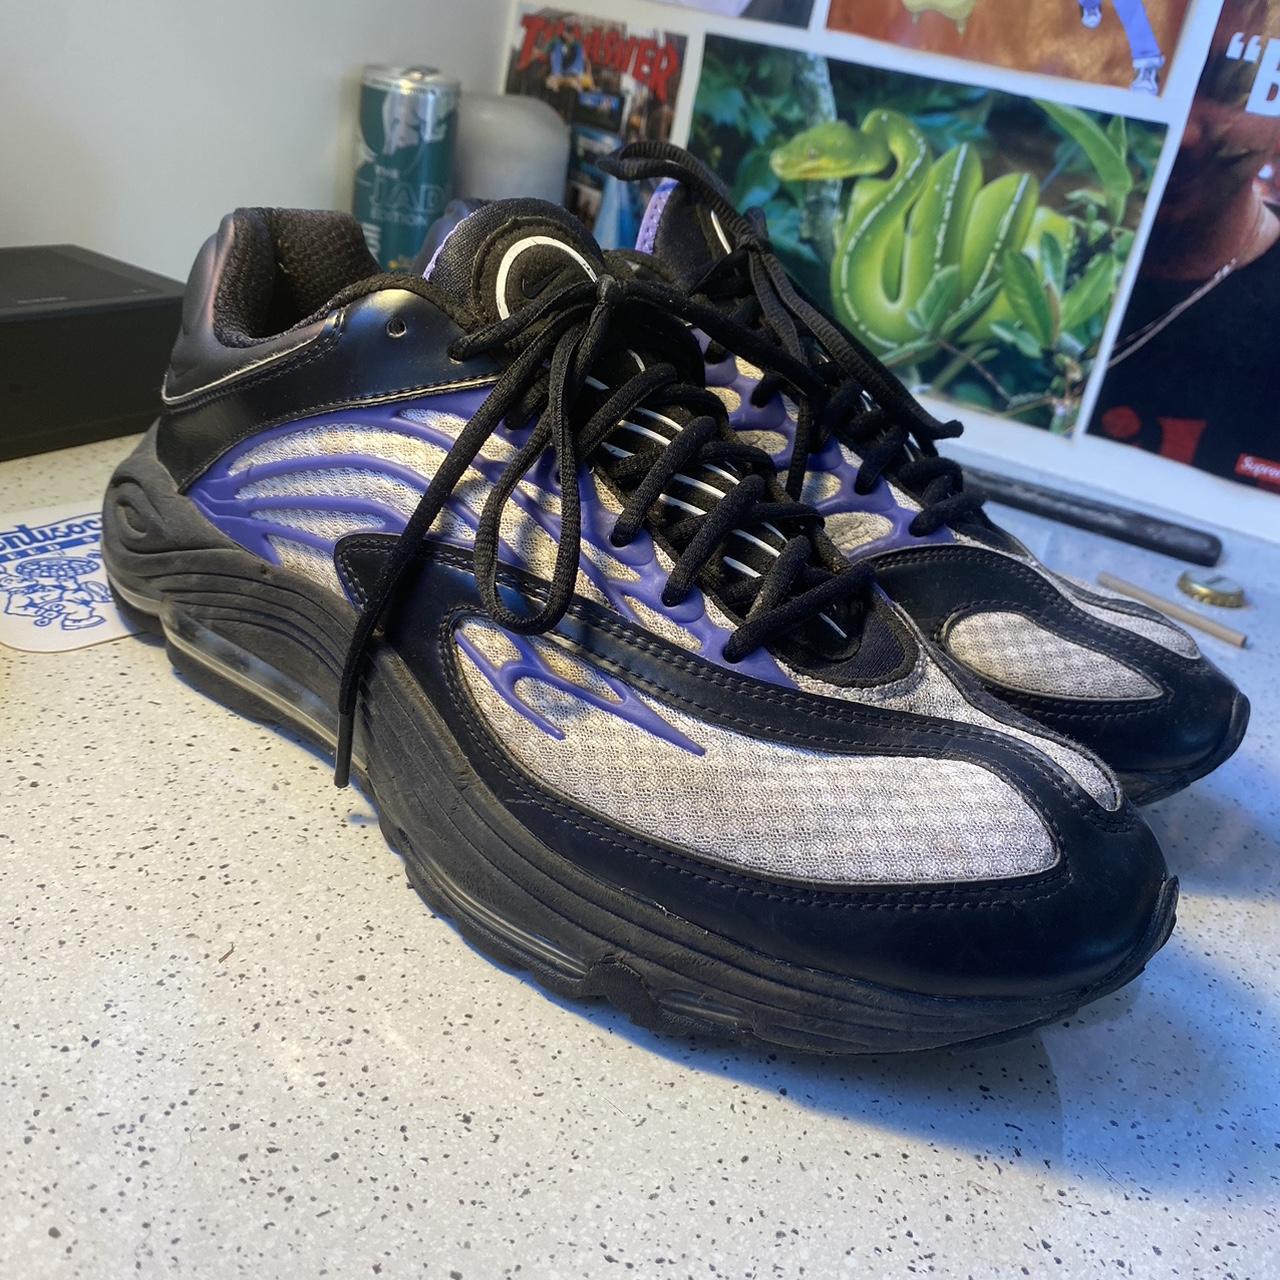 Nike Air Tuned Max Persian Violet Size 11.5 US Worn... - Depop